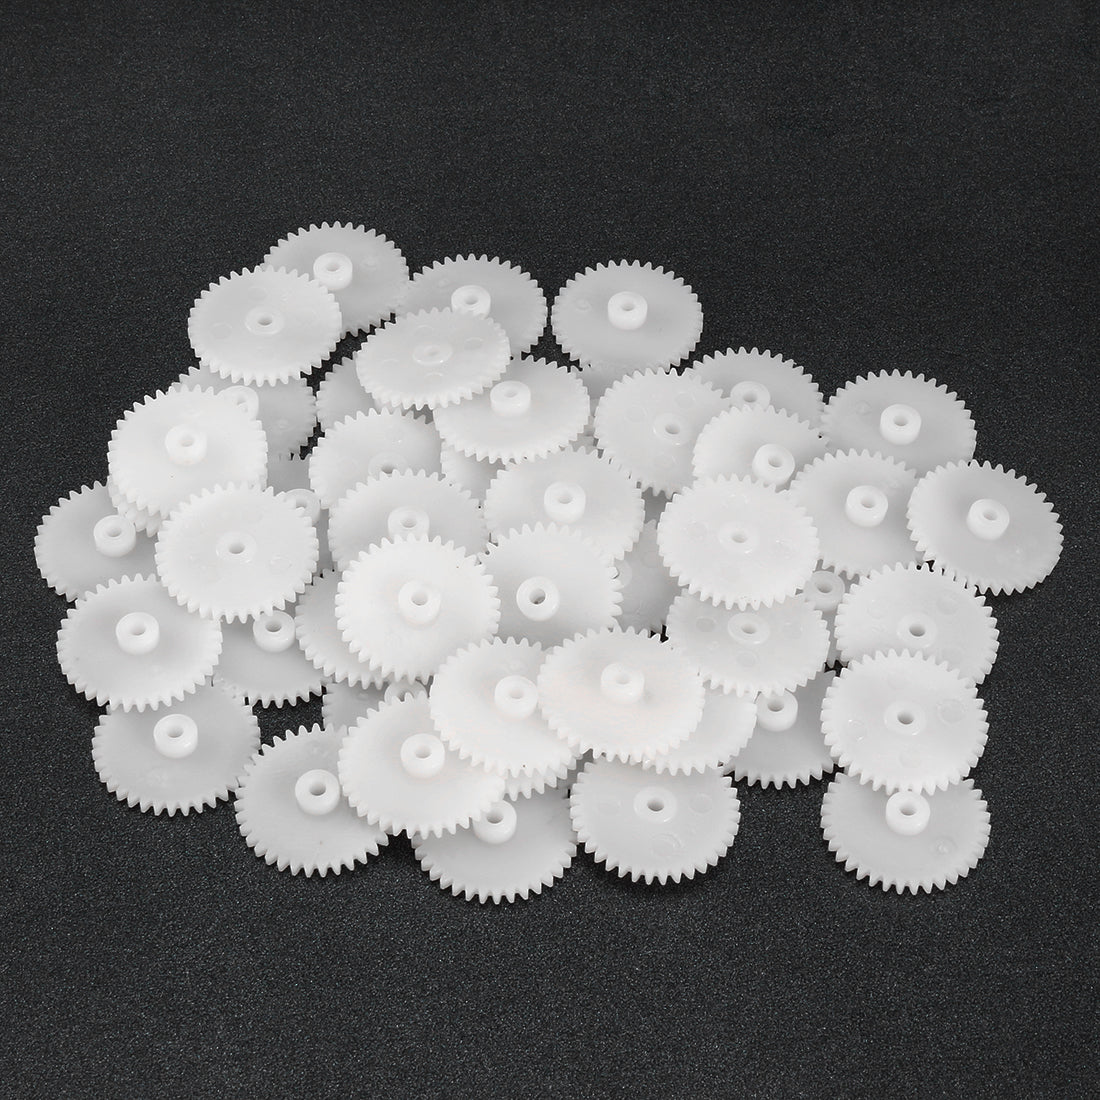 uxcell Uxcell 50Pcs 362A Plastic Gear Accessories with 36 Teeth for DIY Car Robot Motor